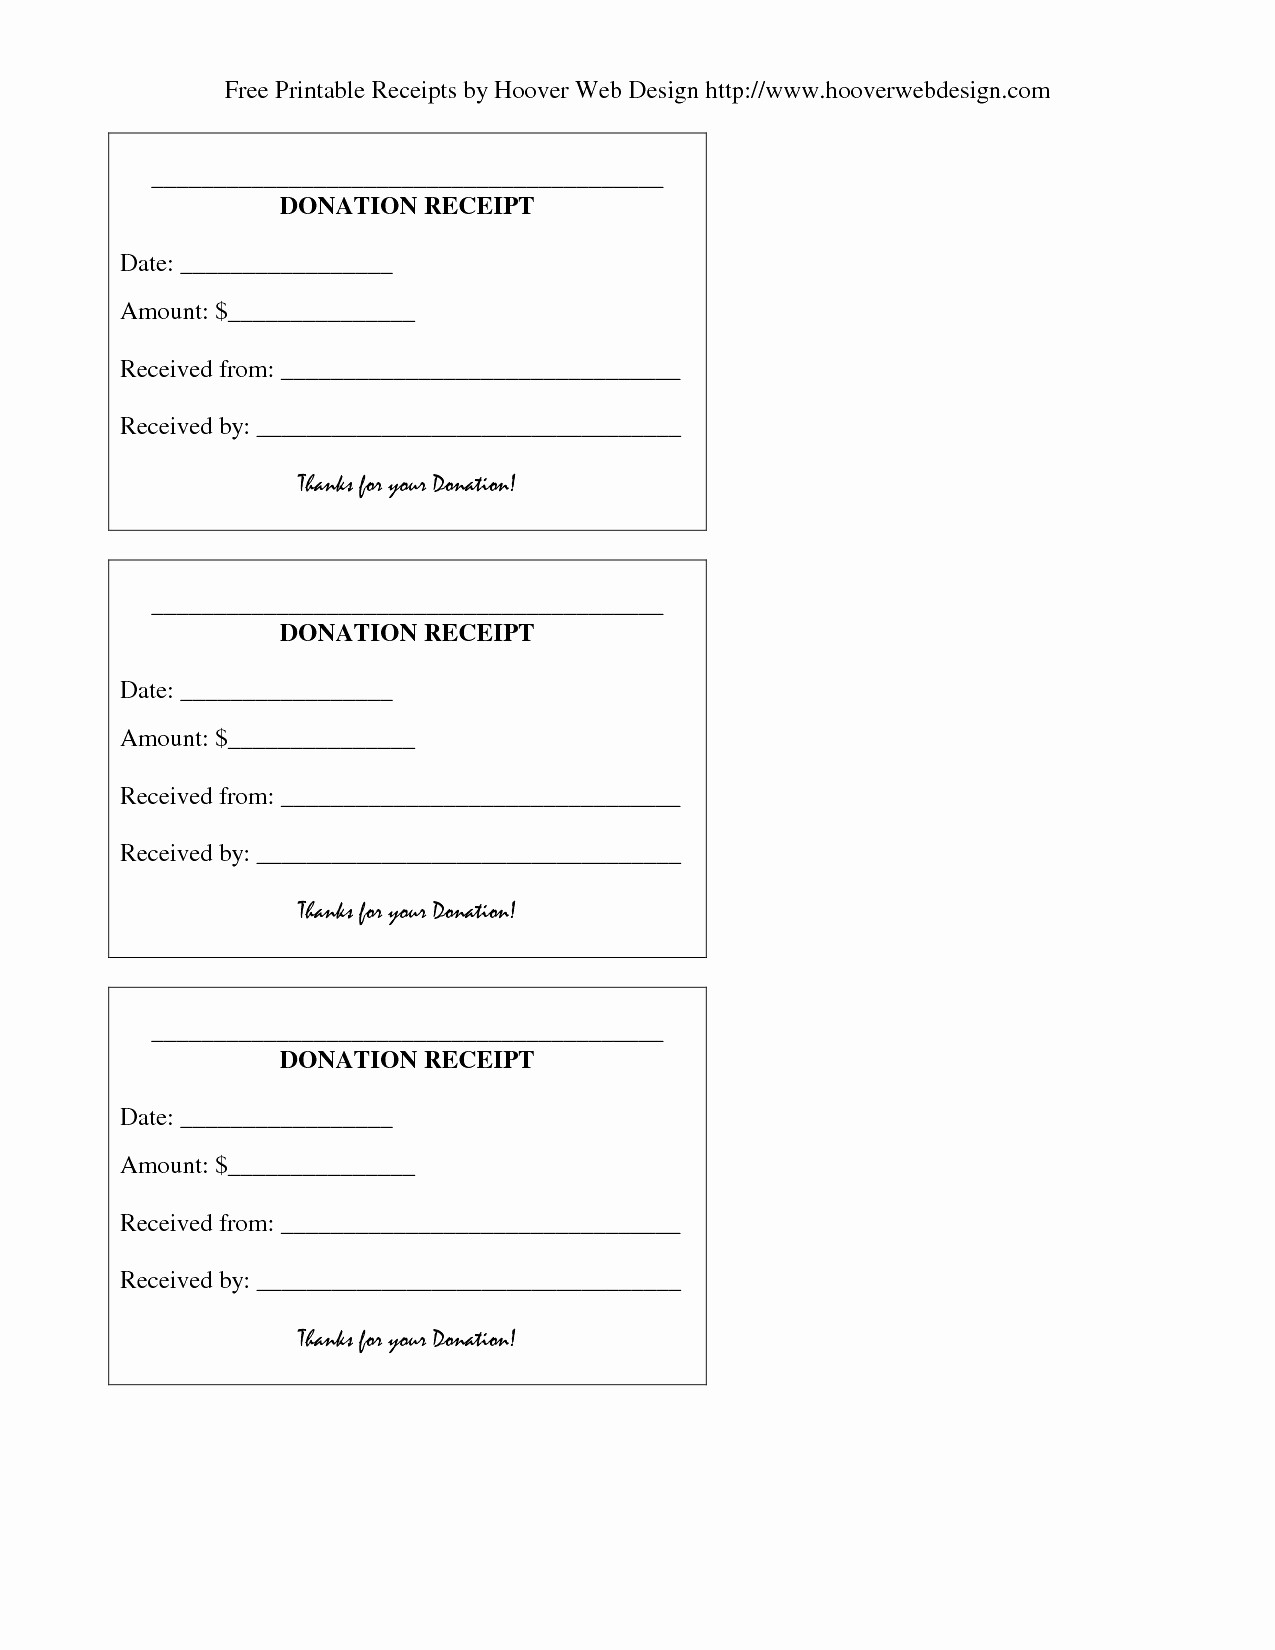 Goodwill Donation Valuation Worksheet Awesome Document Values